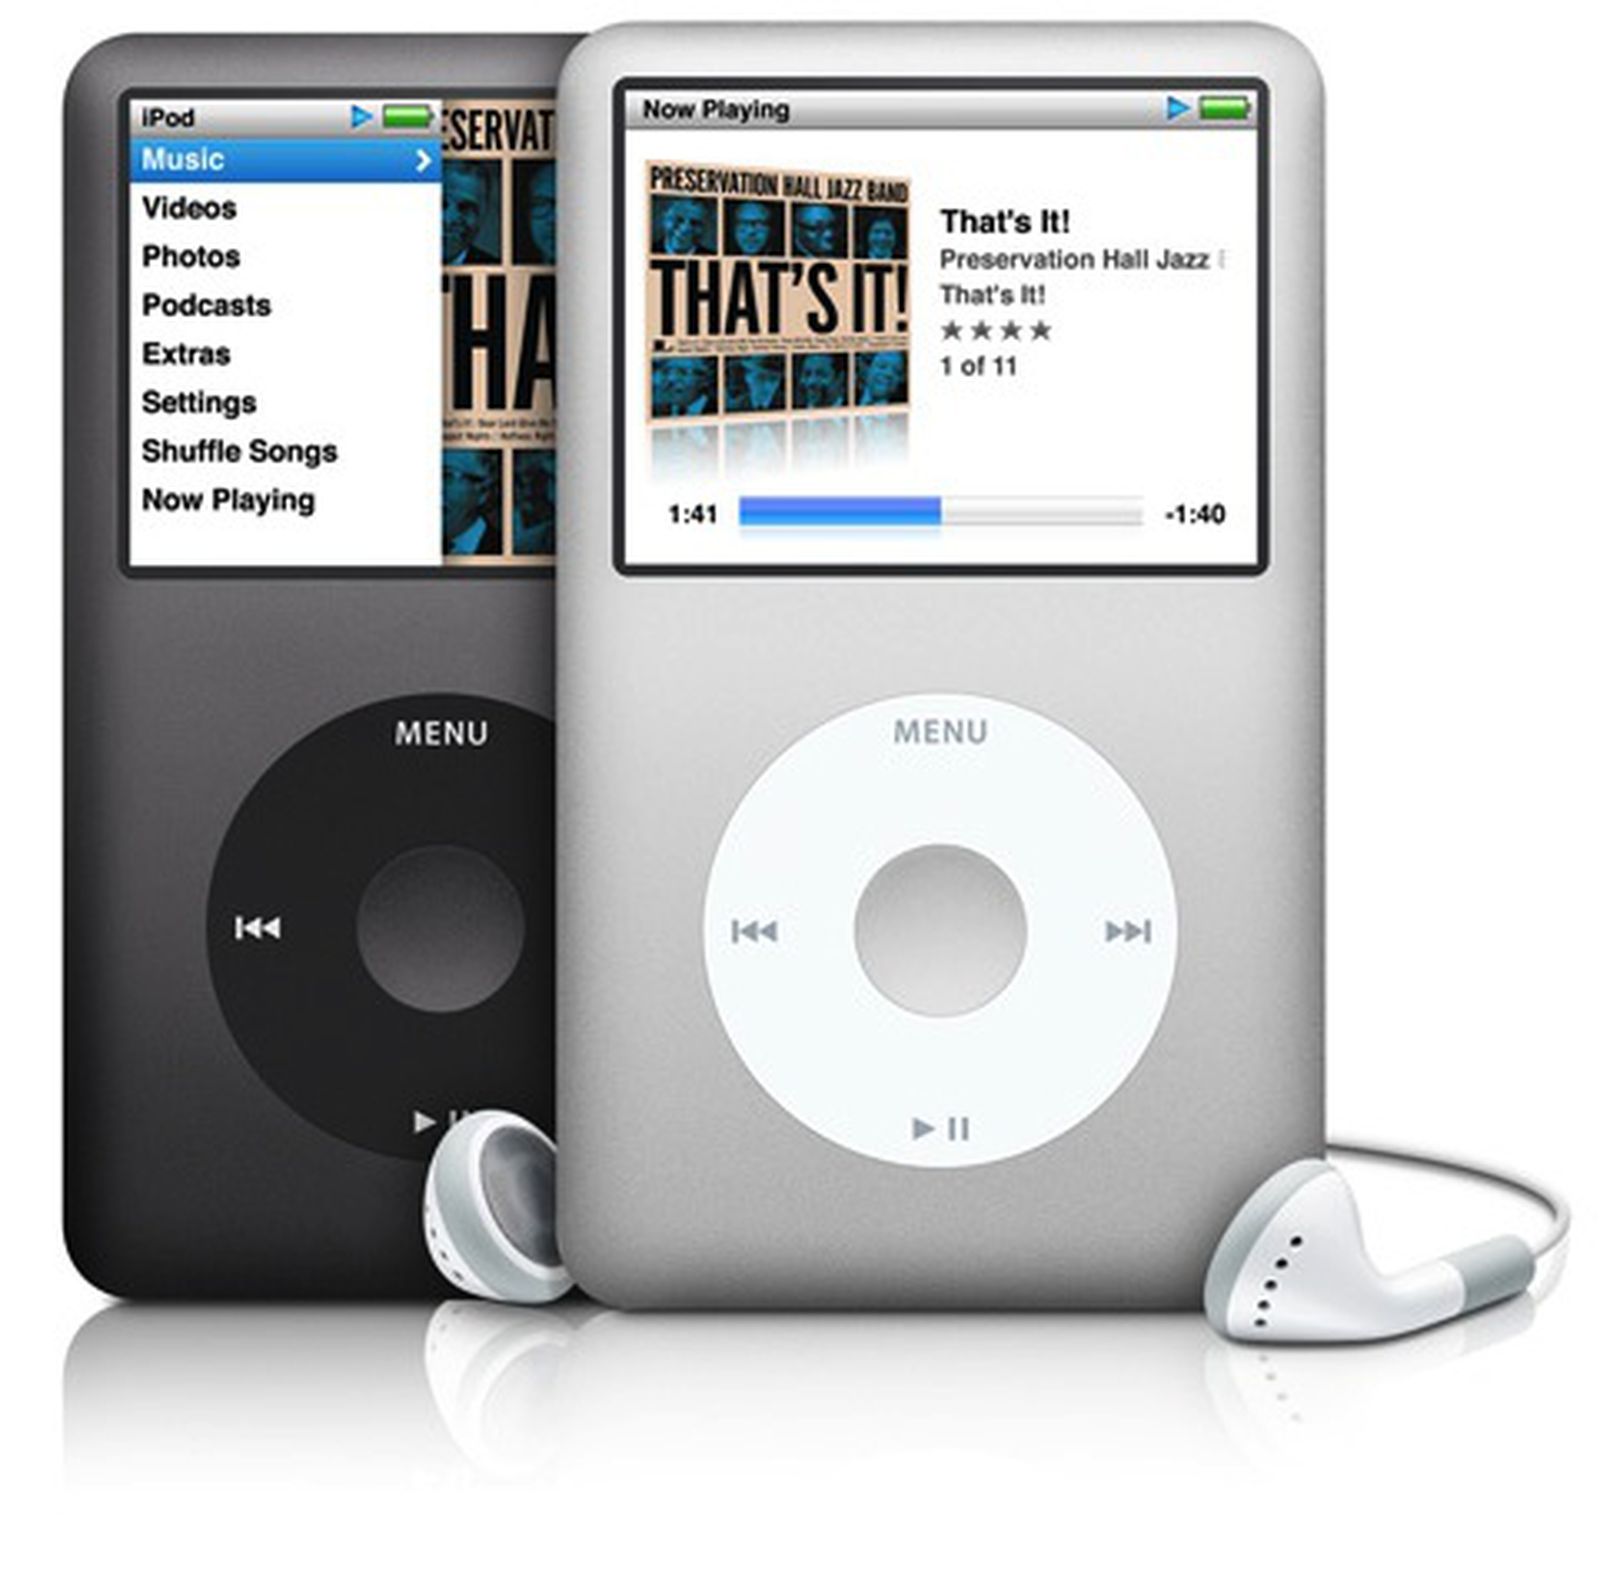 Apple Removes iPod Classic from Online Store - MacRumors